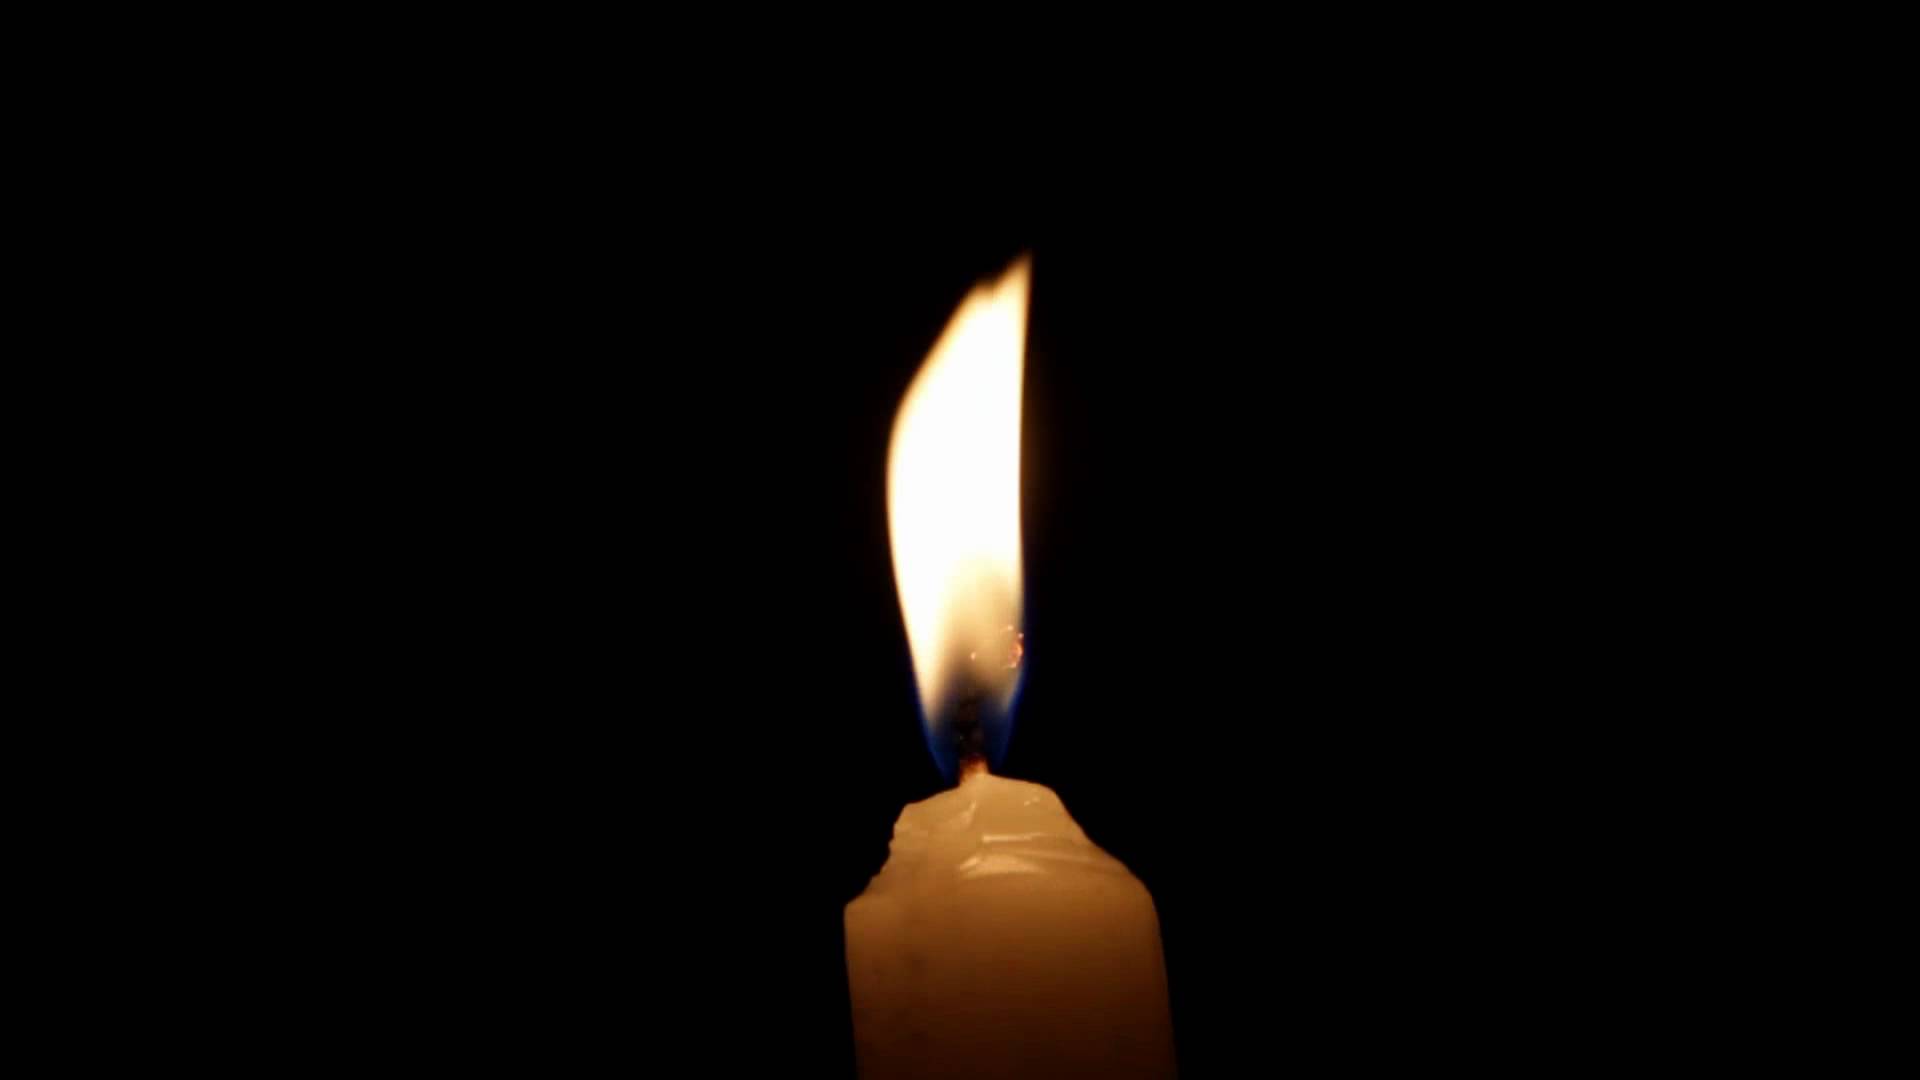 Burning Candle Wick - Stock Footage Preview - YouTube